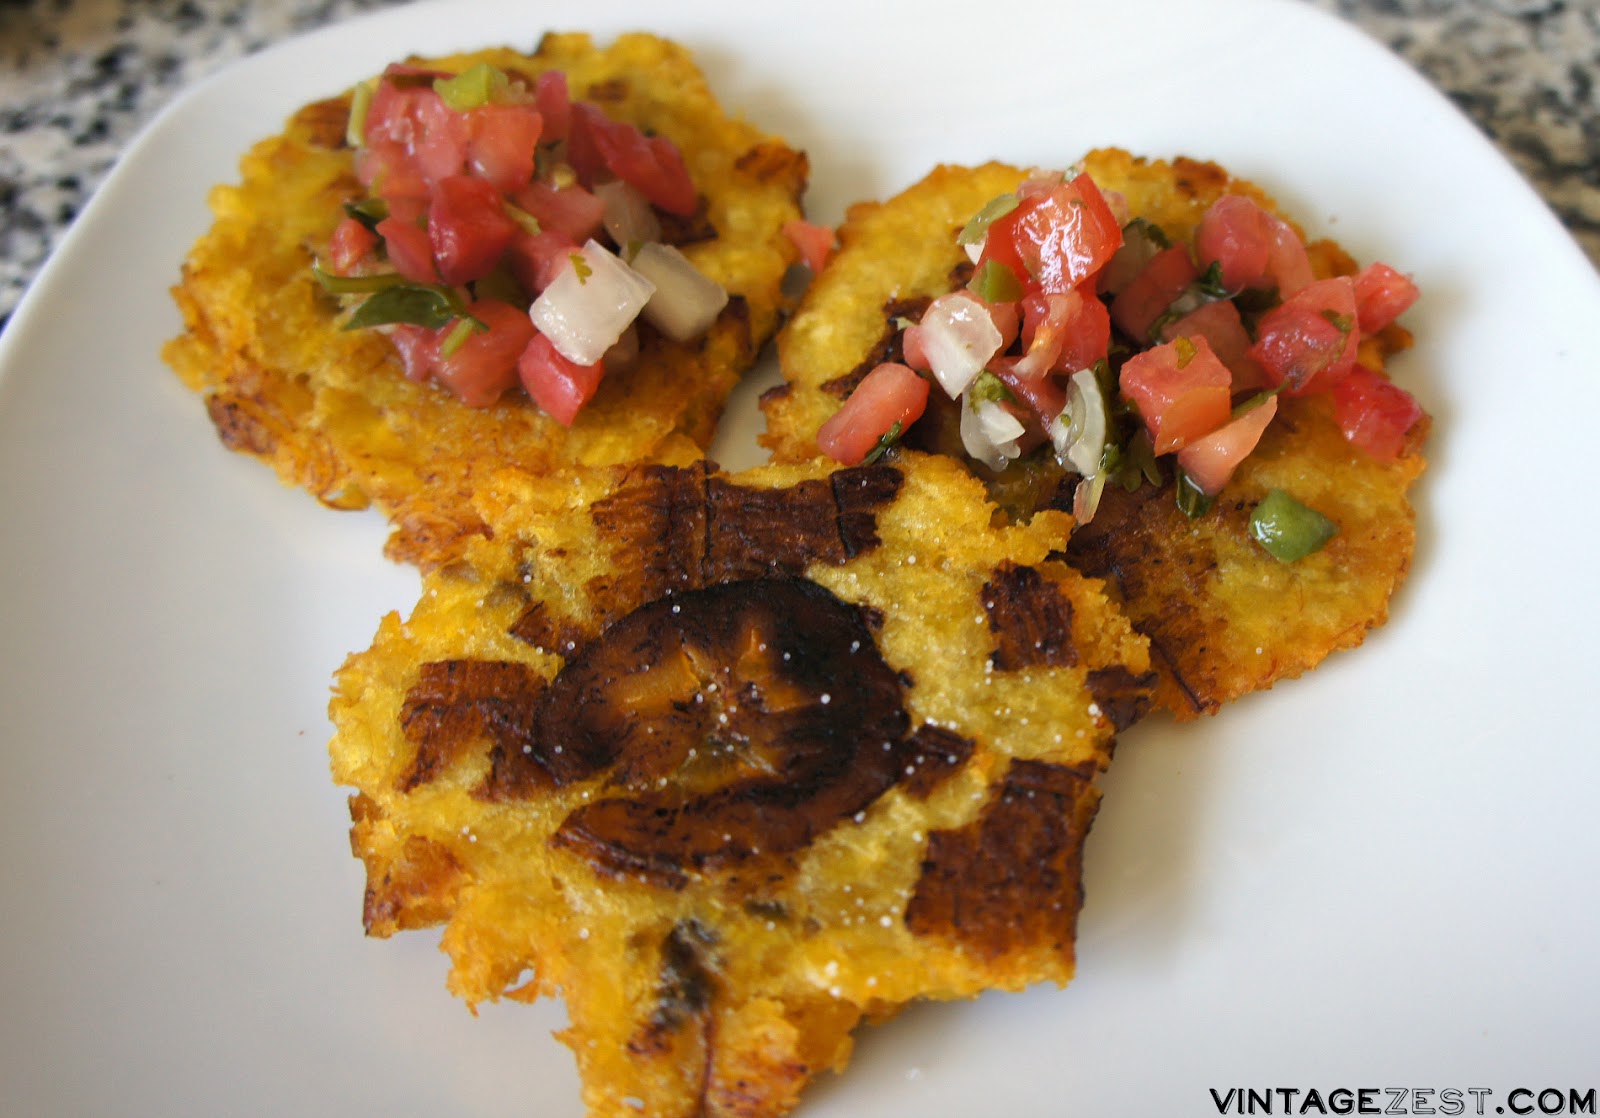 Patacones (Fried Green Plantains) on Diane's Vintage Zest!  #recipe #cooking #appetizer